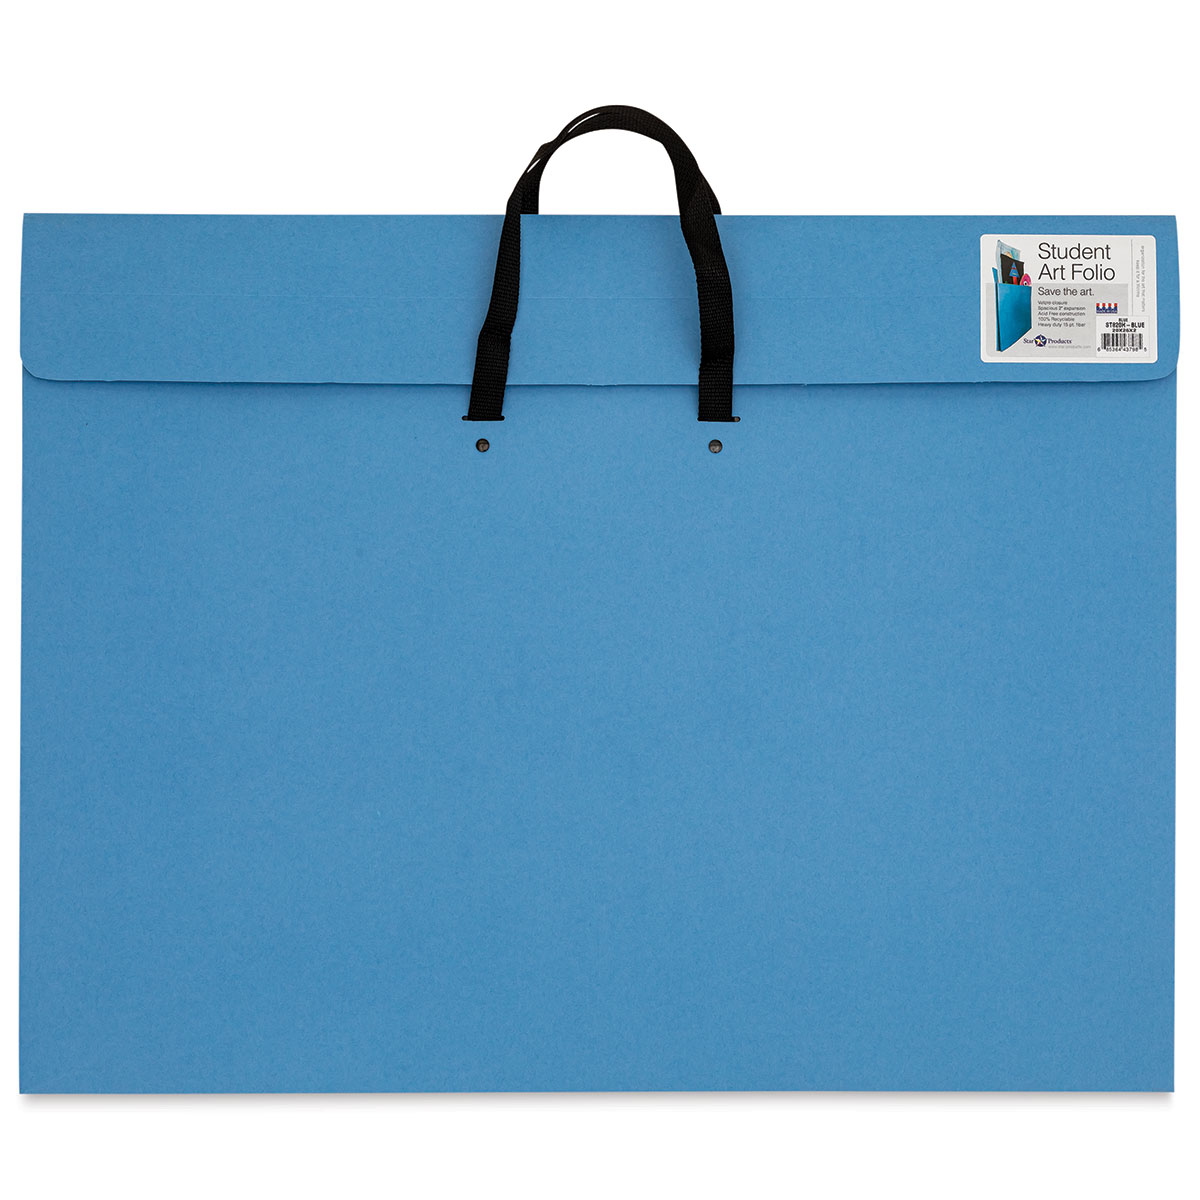 Star Products Student Art Folio with Handles - Blue, 20&#x22; x 26&#x22;